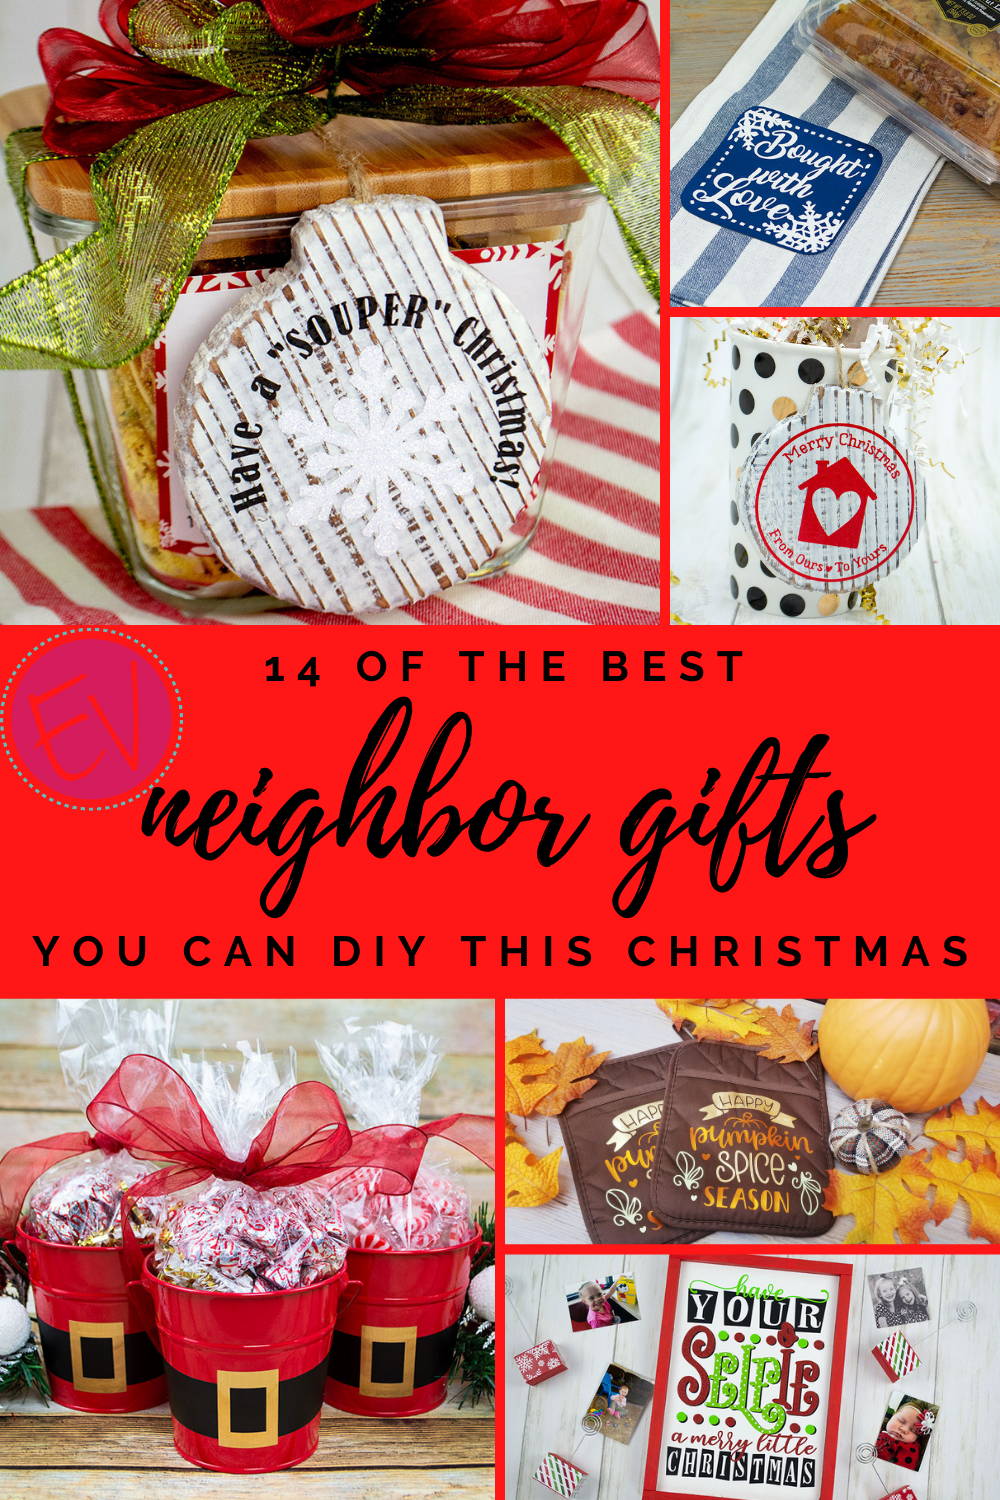 14 Of The Best Neighbor Gifts You Can DIY This Christmas